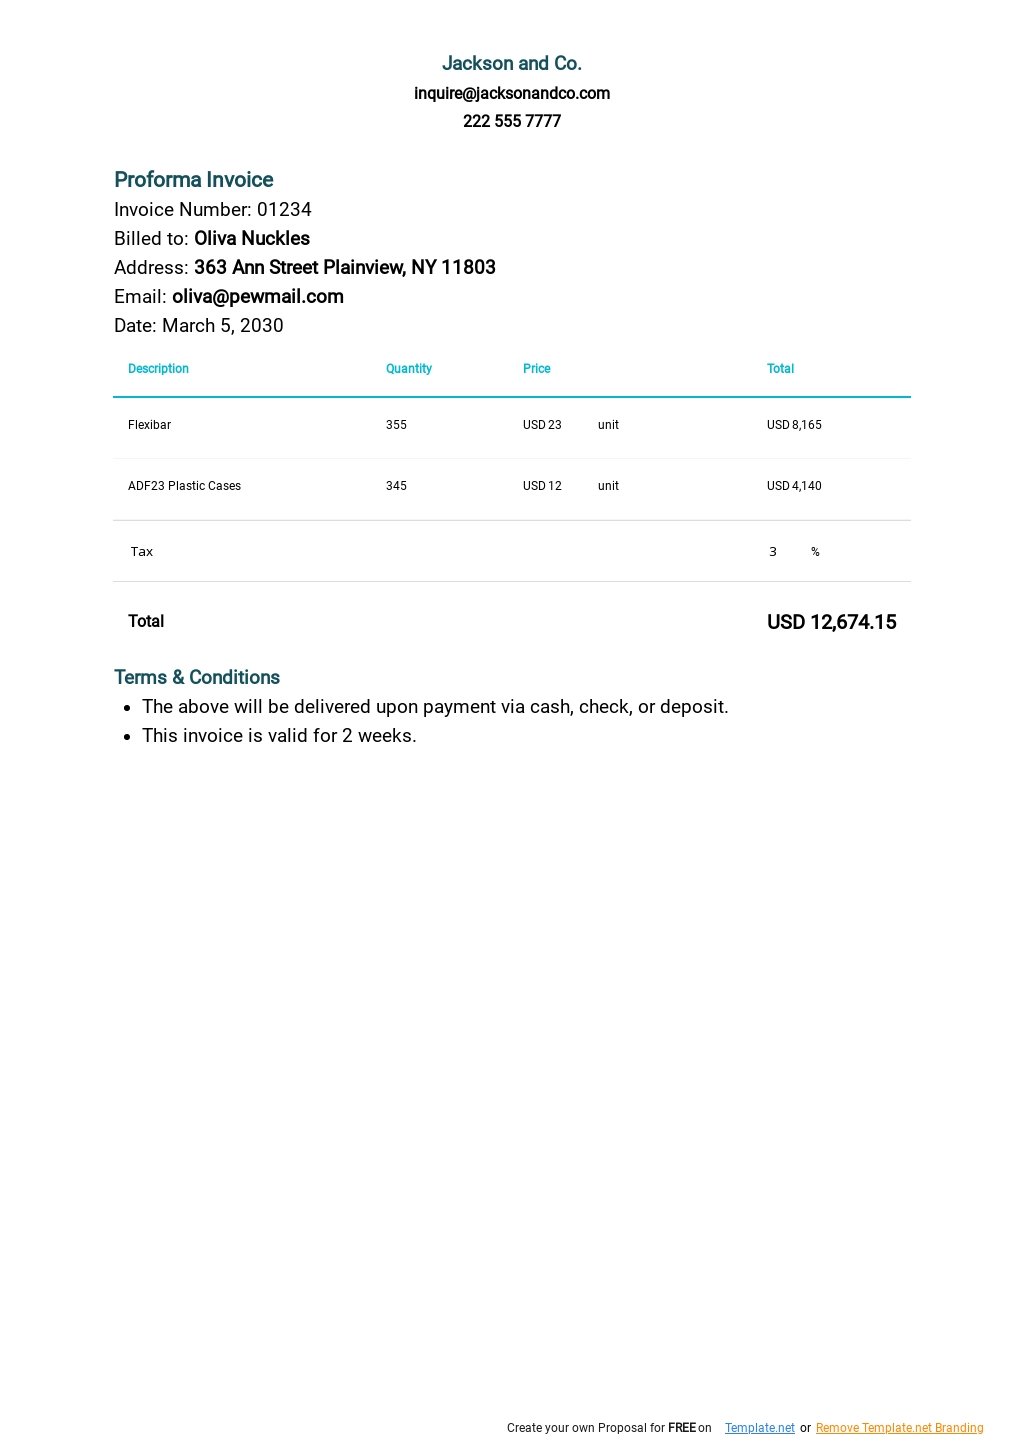 Simple Proforma Invoice Template Free Pdf Google Docs Google Sheets Excel Word Template Net